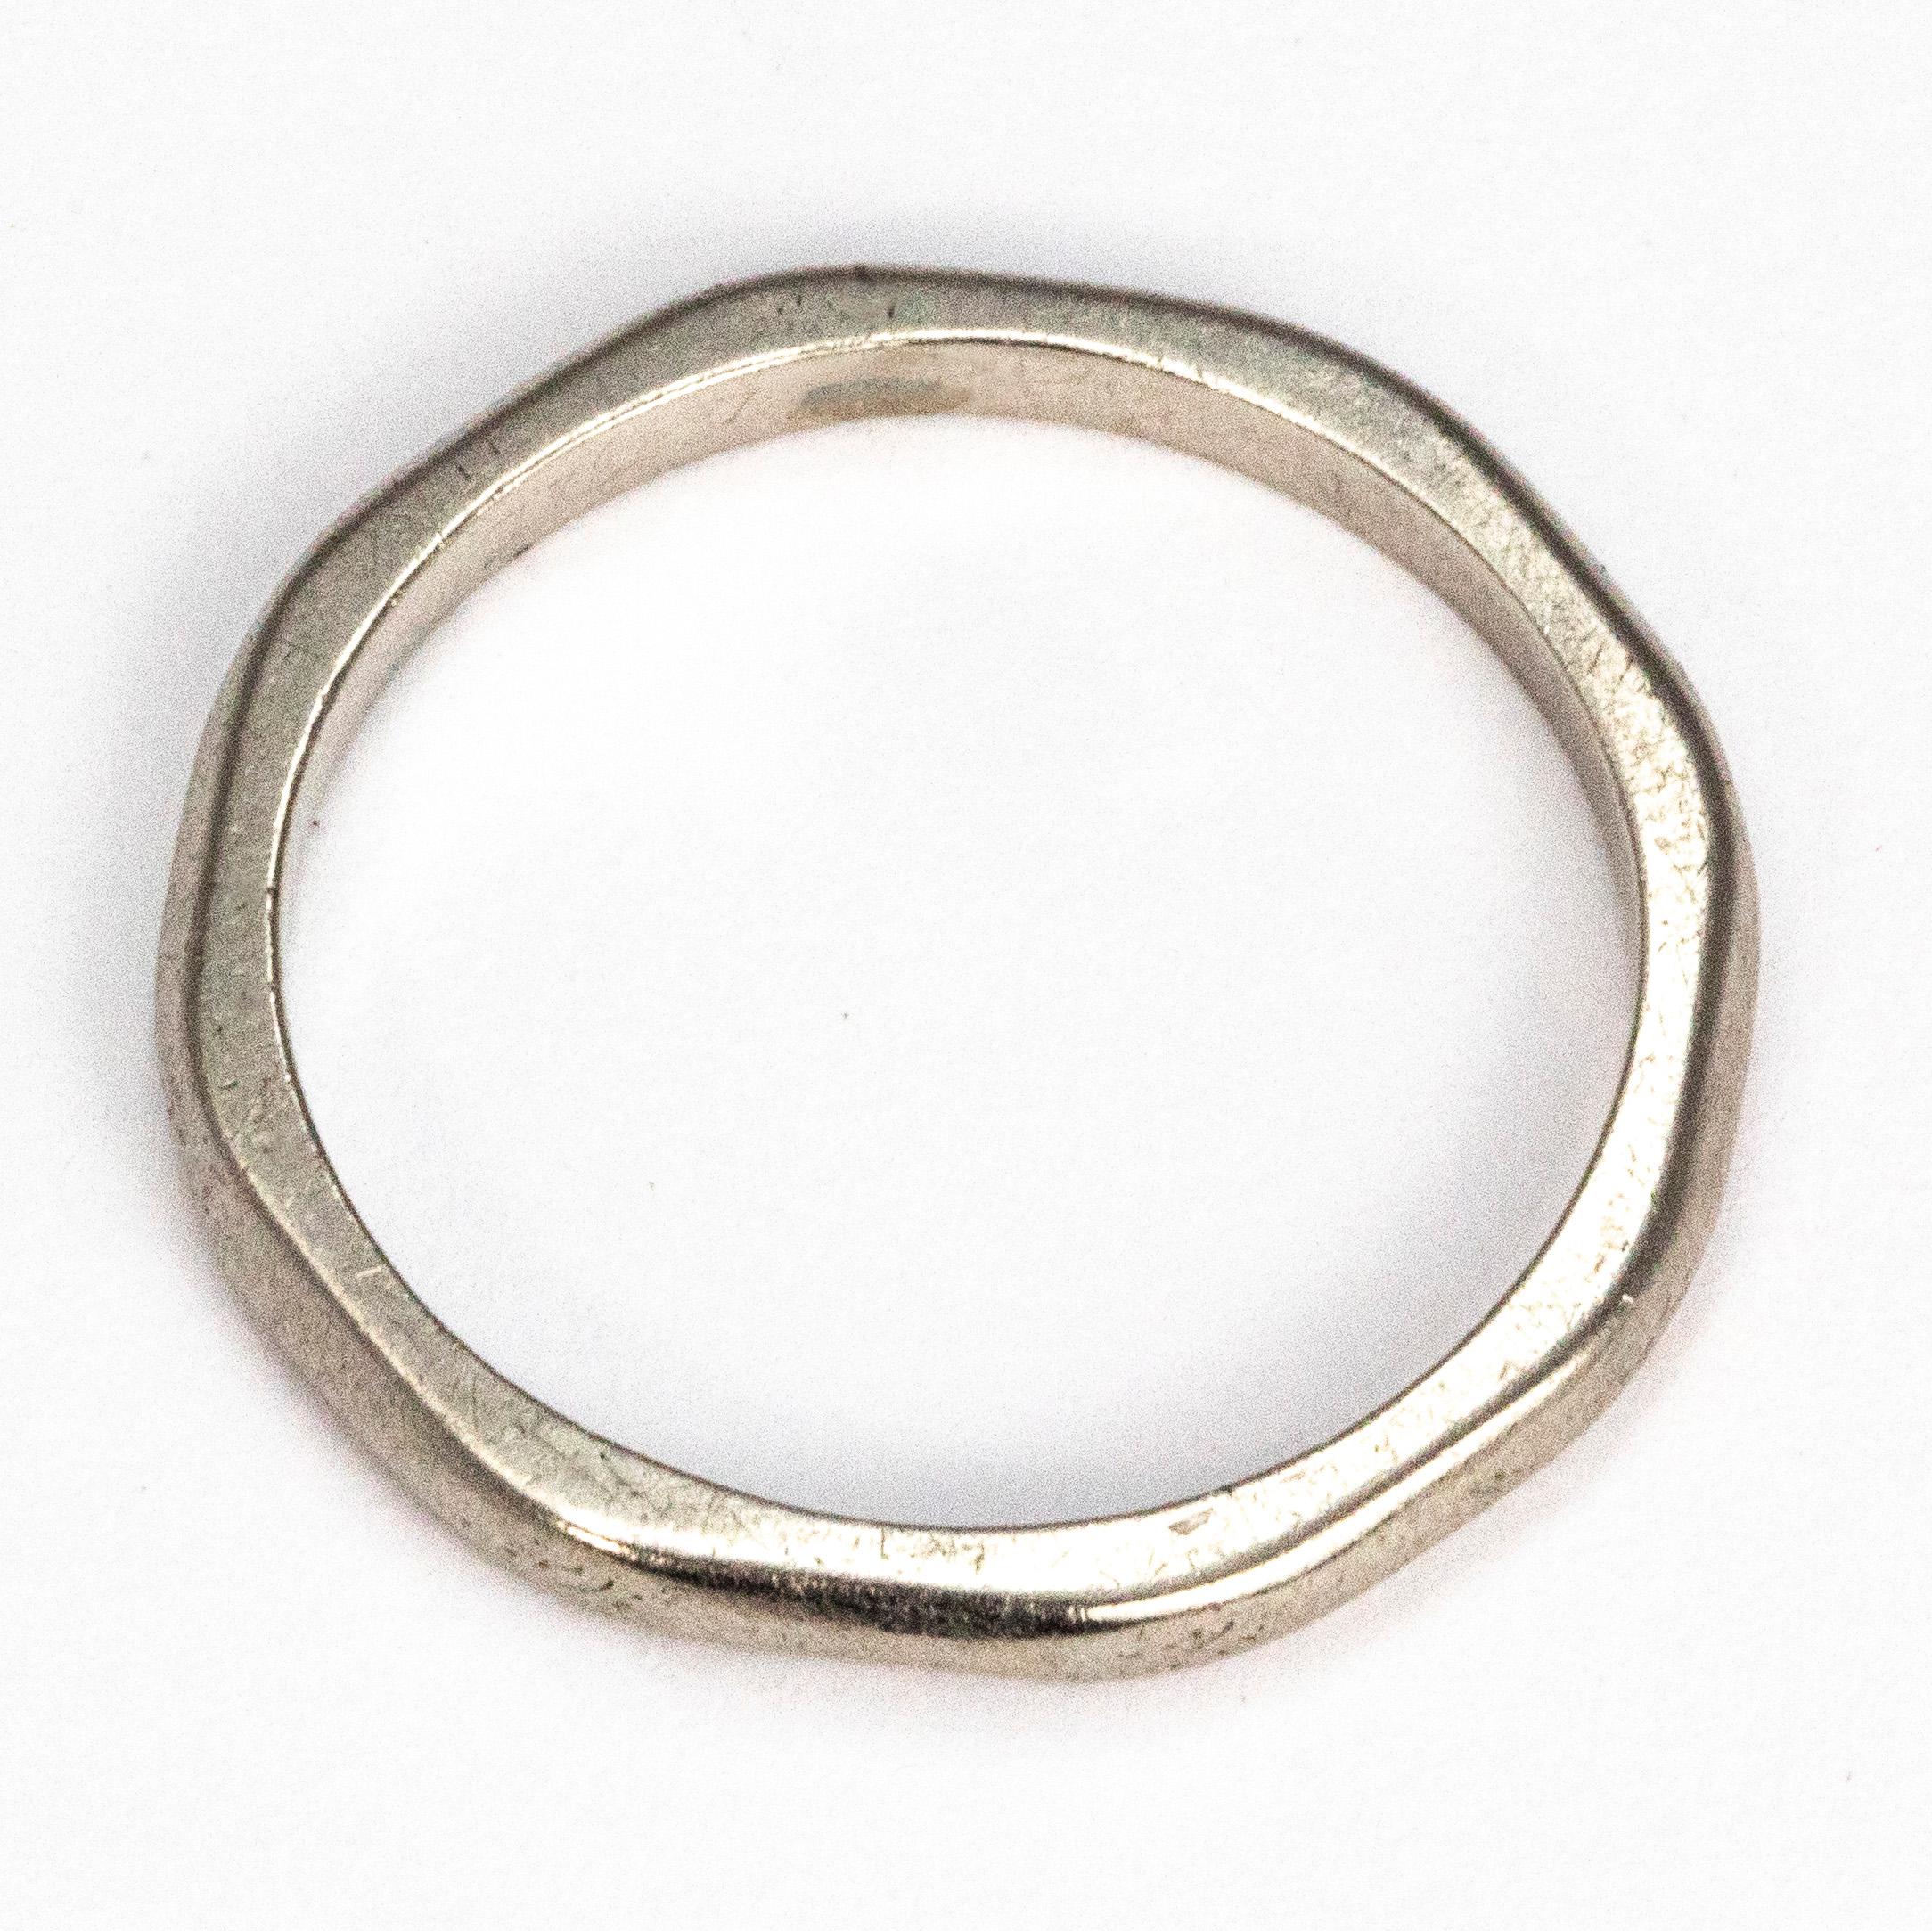 This gorgeous platinum band has smooth and straight edges all the way around which turns this band from being a plain glossy band to a decorative one.   

Ring Size: O or 7 
Band Width: 1.5mm 